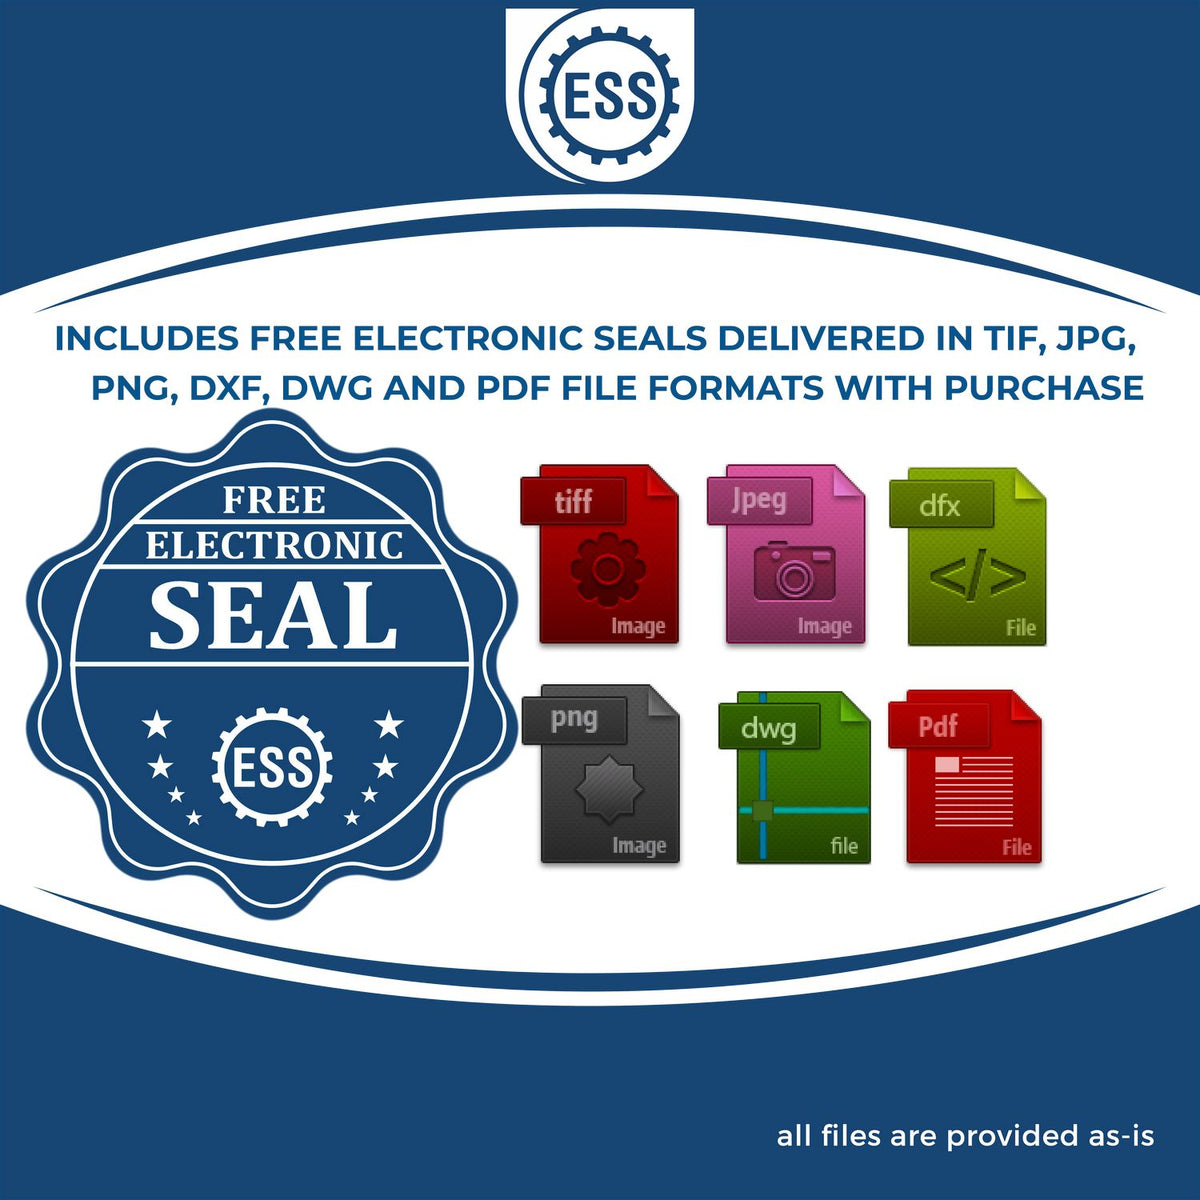 An infographic for the free electronic seal for the Slim Pre-Inked Rhode Island Architect Seal Stamp illustrating the different file type icons such as DXF, DWG, TIF, JPG and PNG.